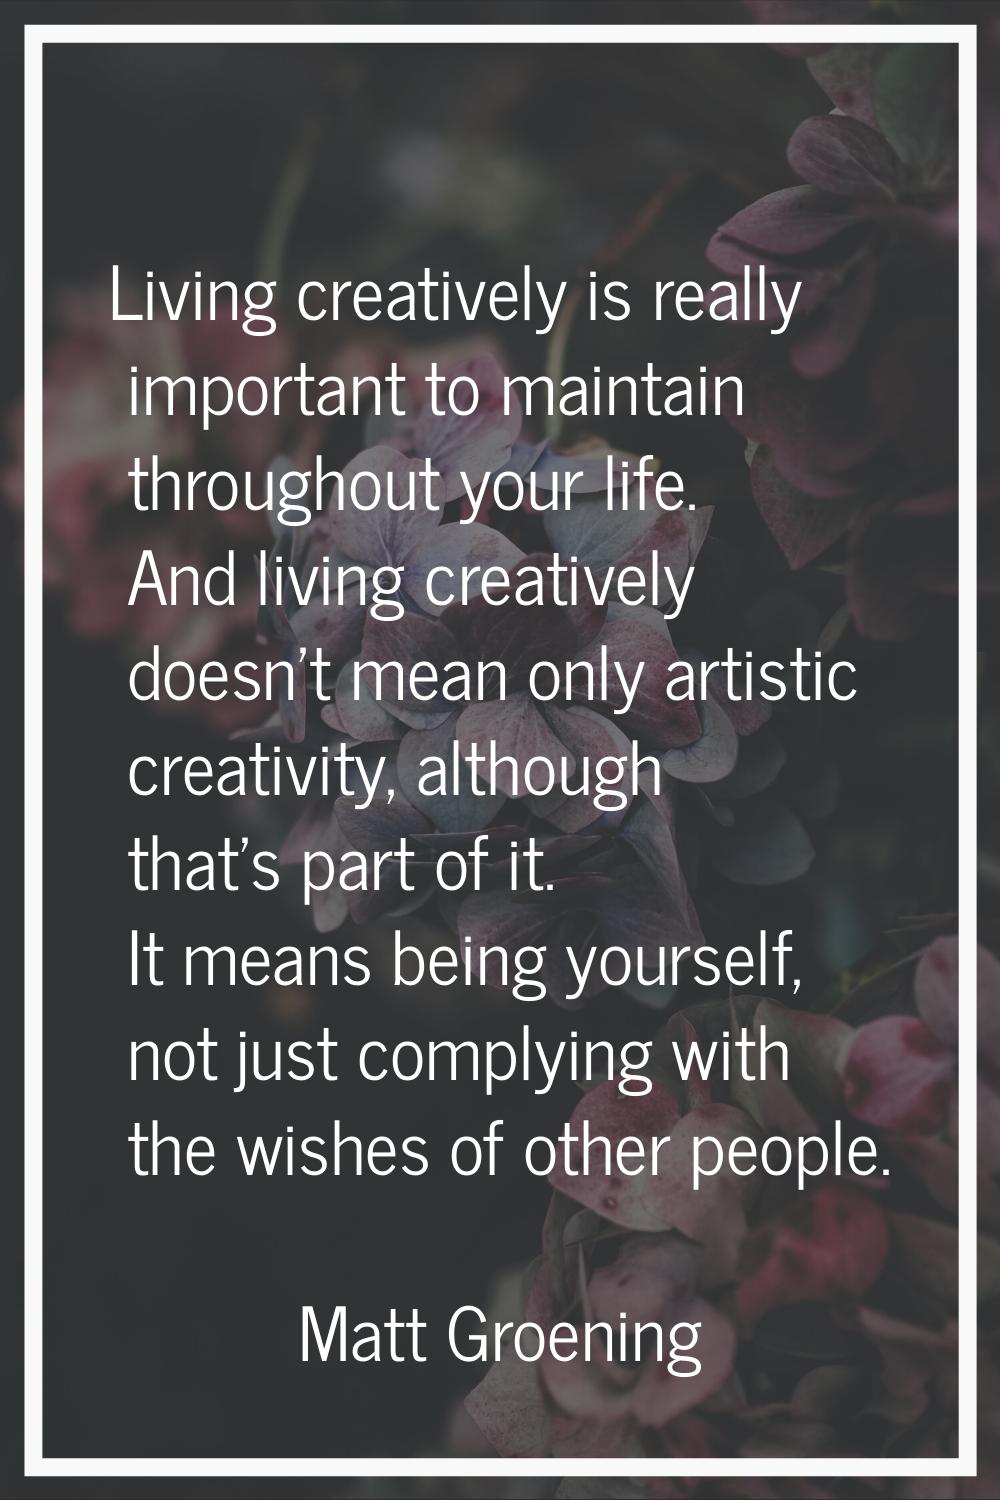 Living creatively is really important to maintain throughout your life. And living creatively doesn